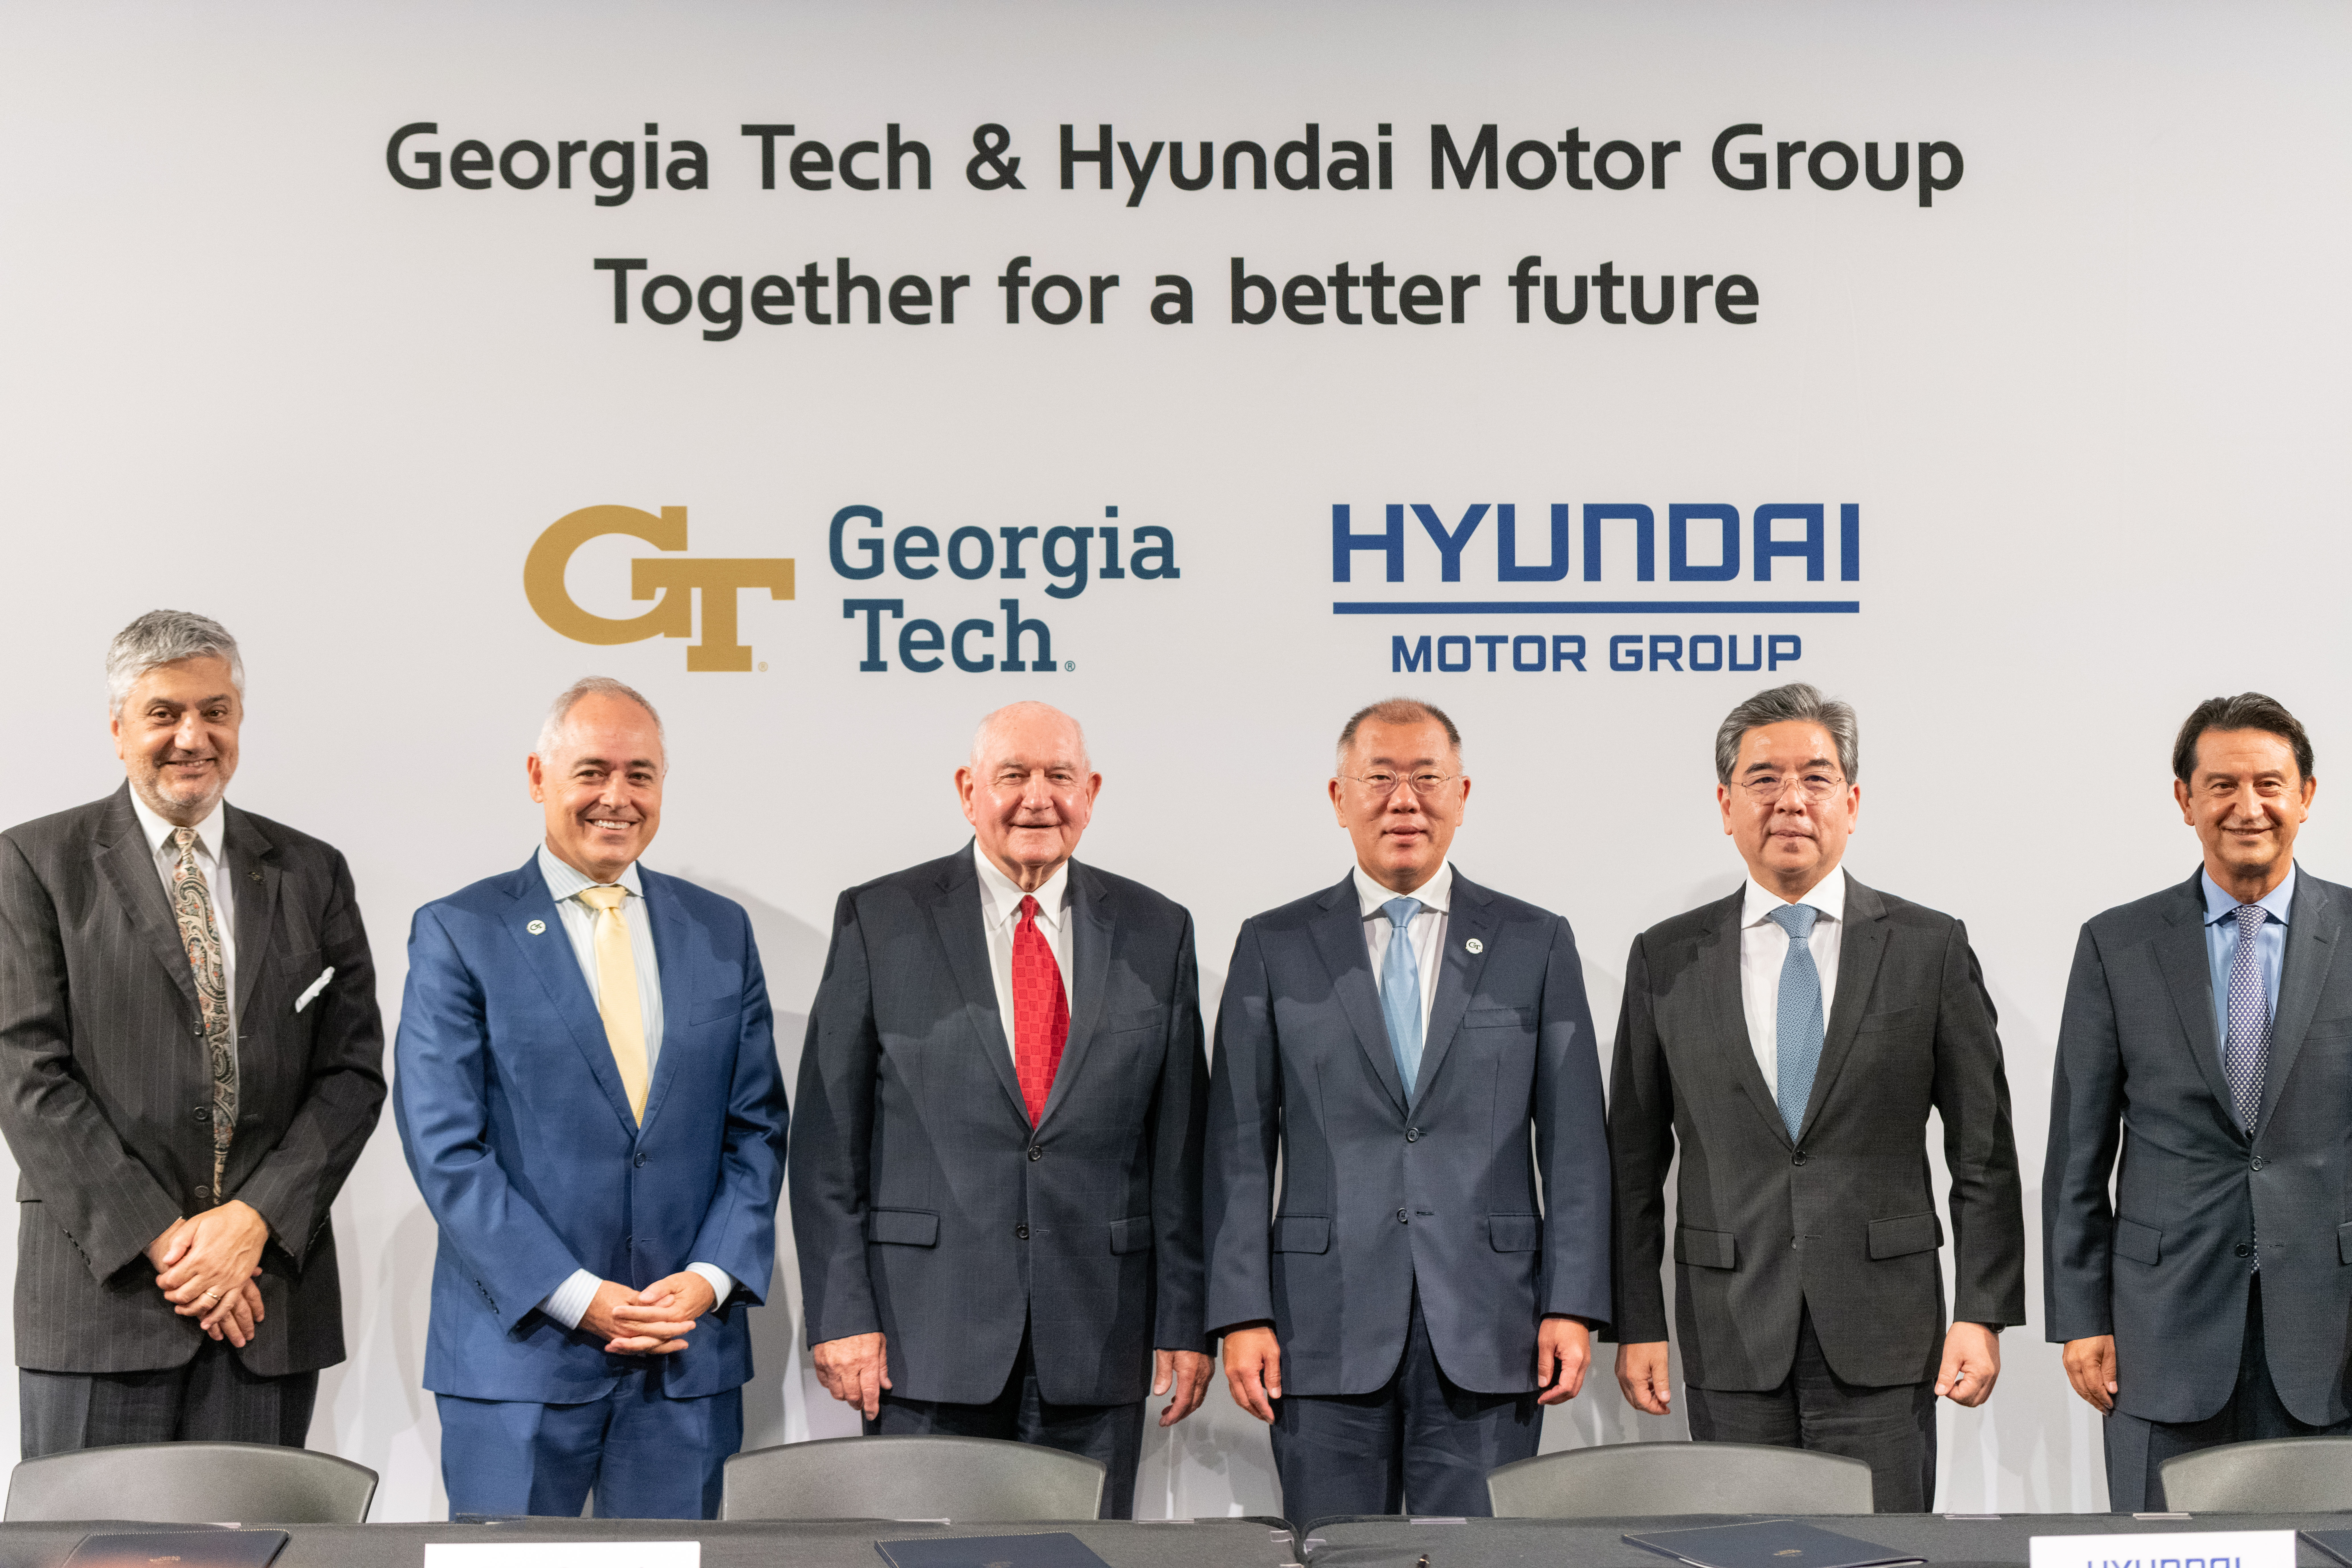 Georgia Tech and Hyundai leaders pose for a photo following the signing of the memorandum of understanding. From left to right: Executive Vice President for Research Chaouki Abdallah, Georgia Tech President Ángel Cabrera, University System of Georgia Chancellor Sonny Perdue, Executive Chairman of Hyundai Motor Company Euisun Chung, President and CEO Jay Chang, President and Global COO José Muñoz. 
